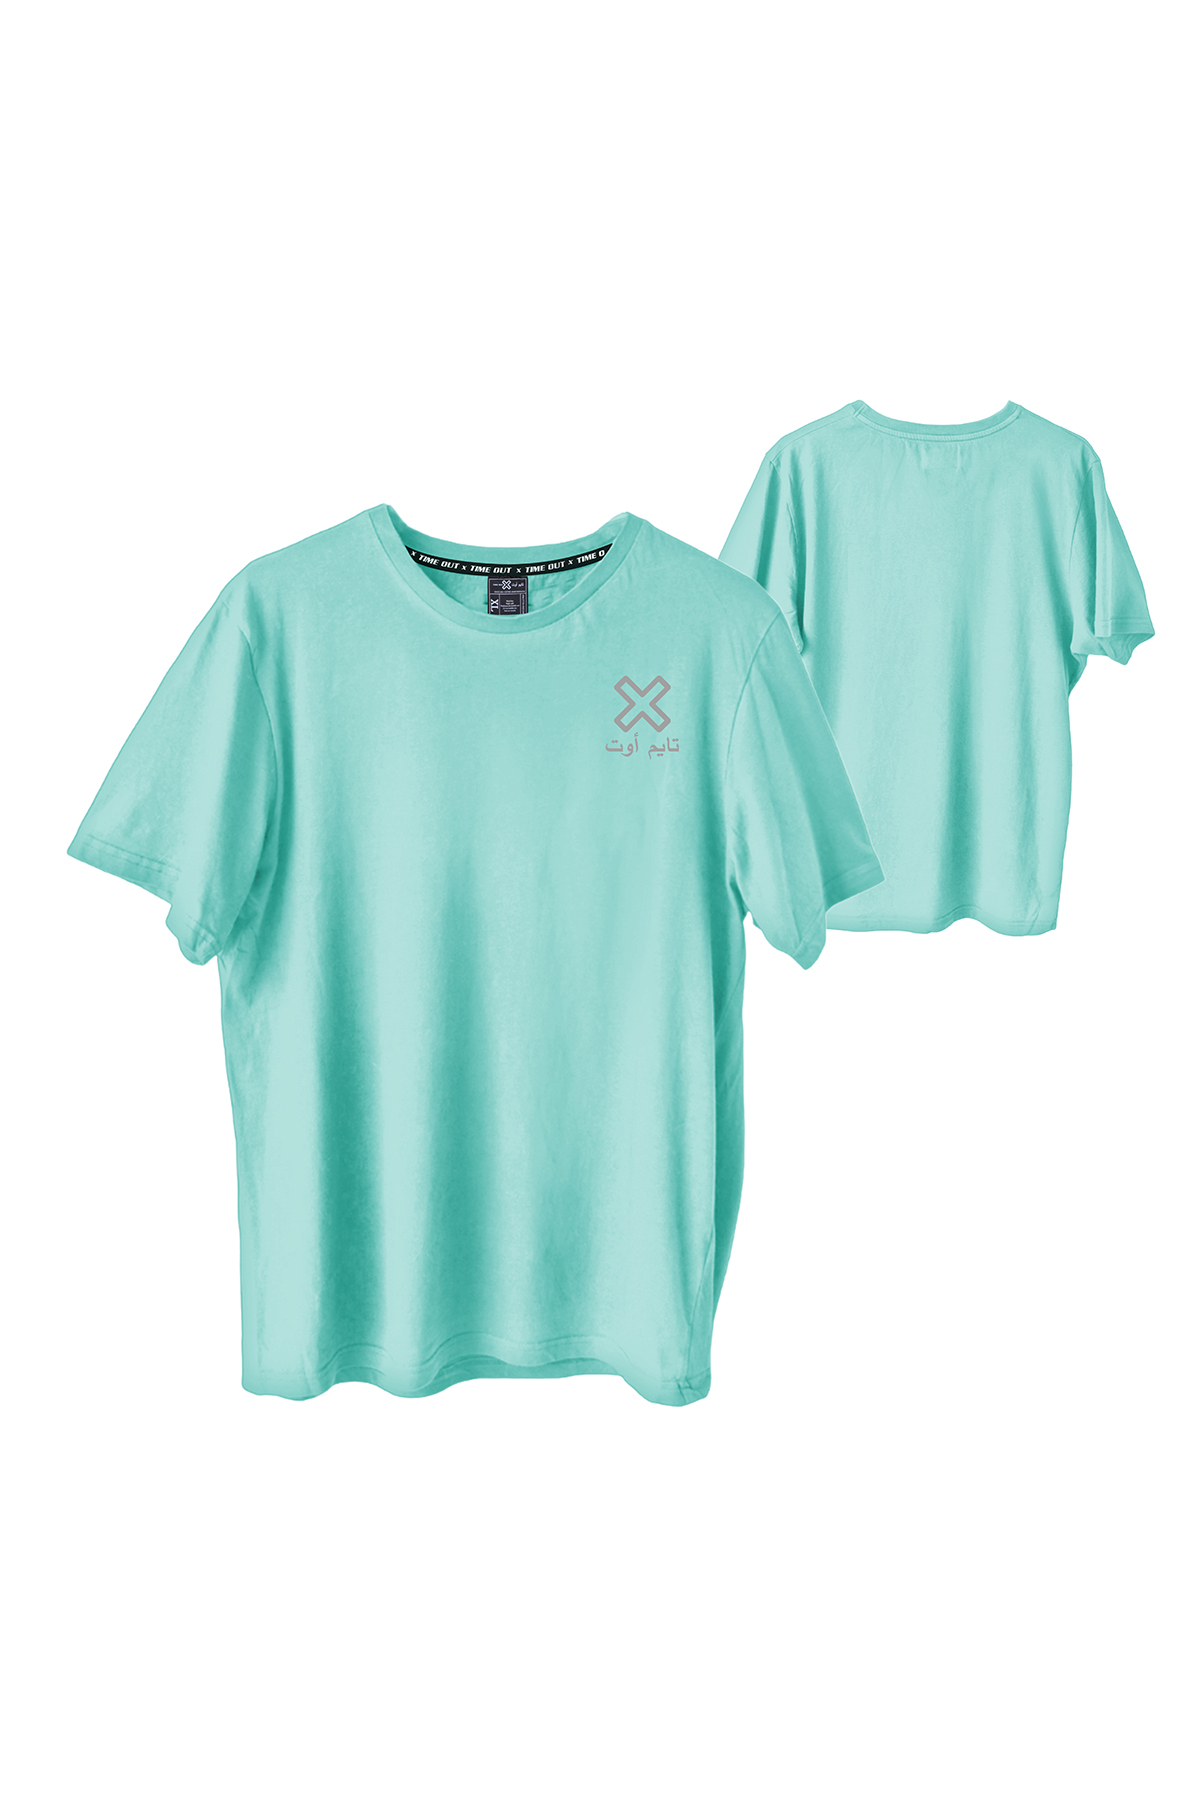 Time-Out-X-Signature-Short-Sleeve-Classic-Training-T-Shirt—Light-Aqua—Front-and-Back